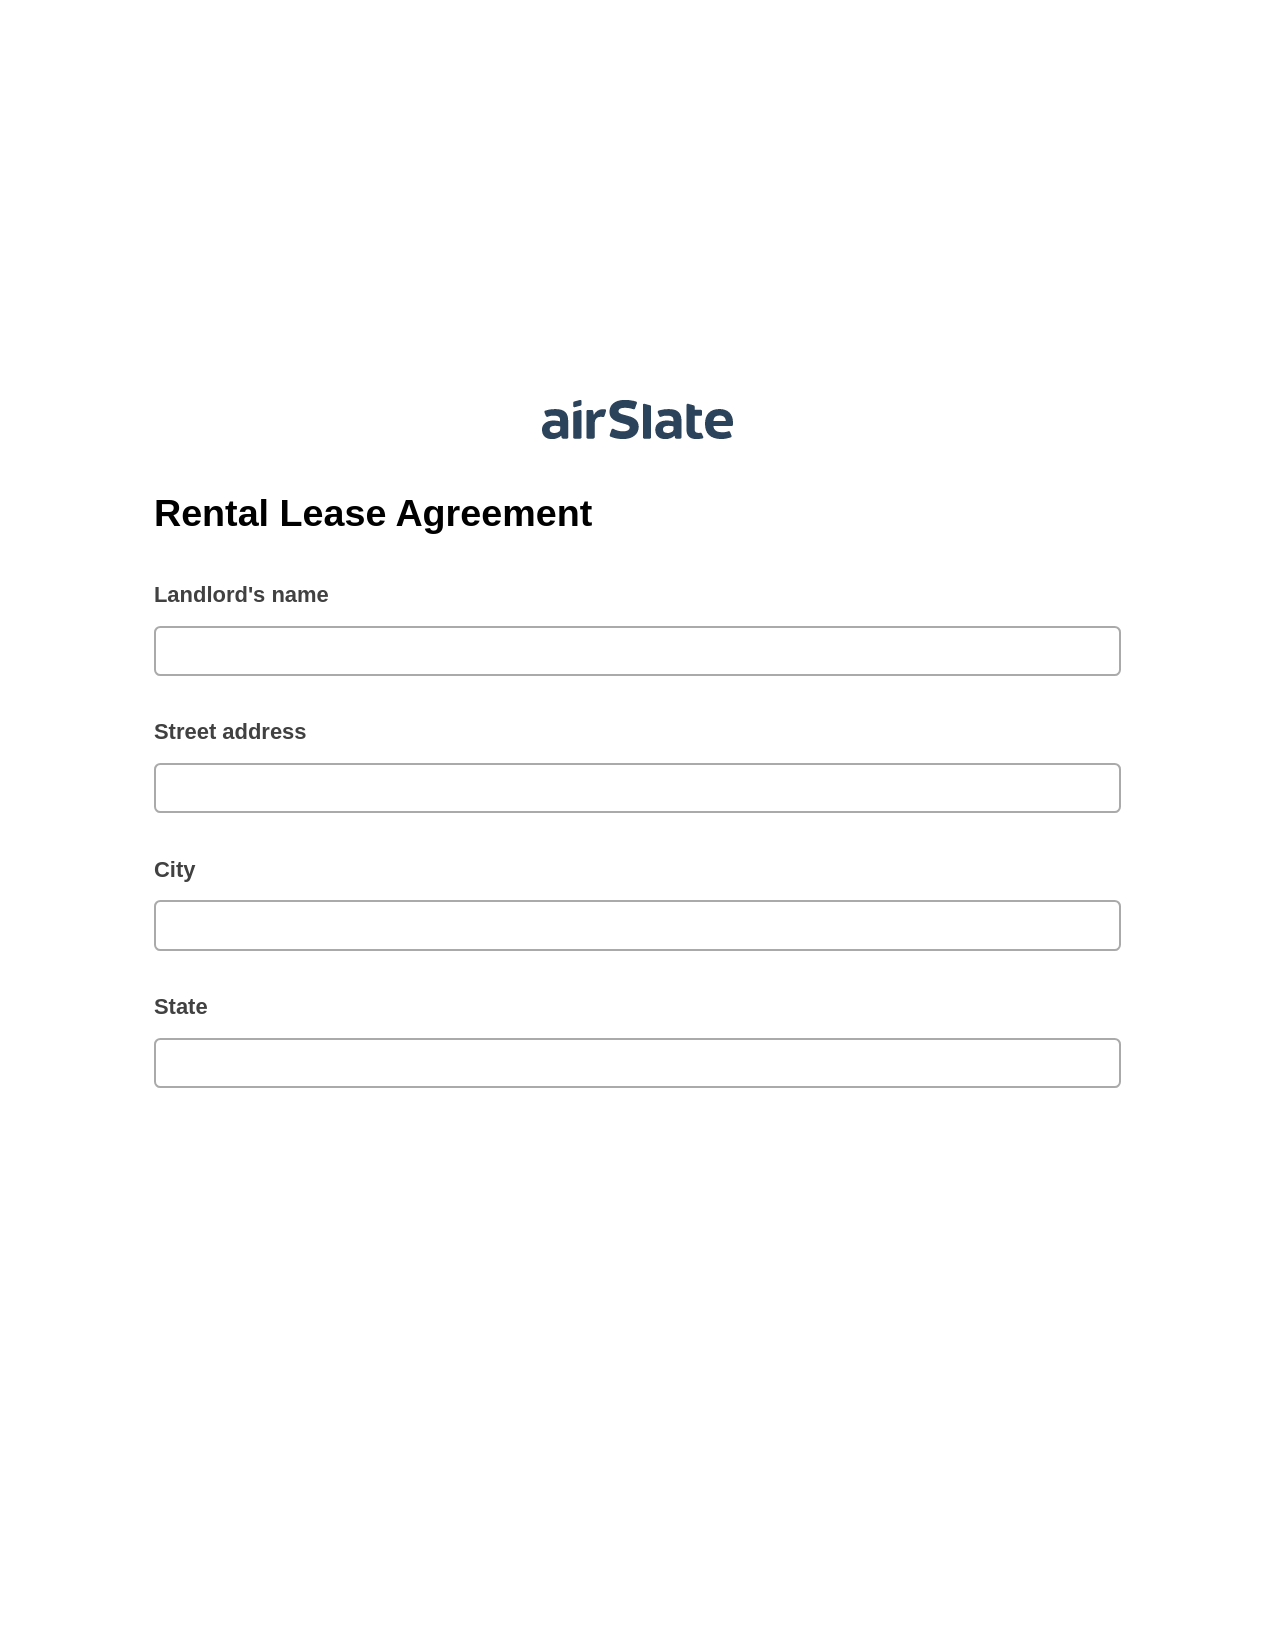 Multirole Rental Lease Agreement Pre-fill from CSV File Bot, Assign Roles to Recipients Bot, Box Bot